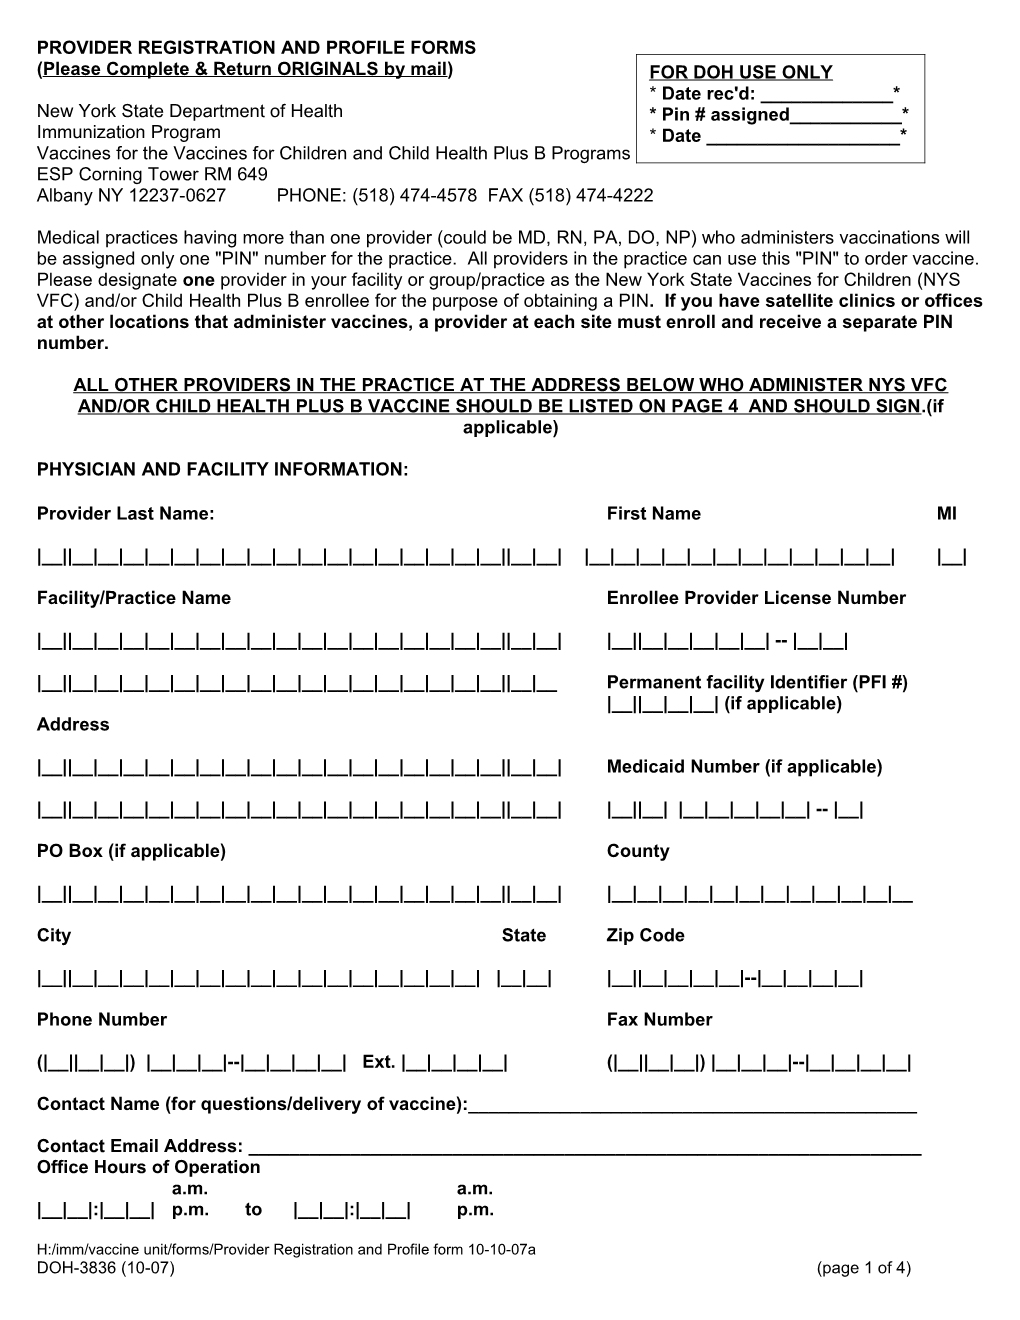 Provider Registration and Profile Forms